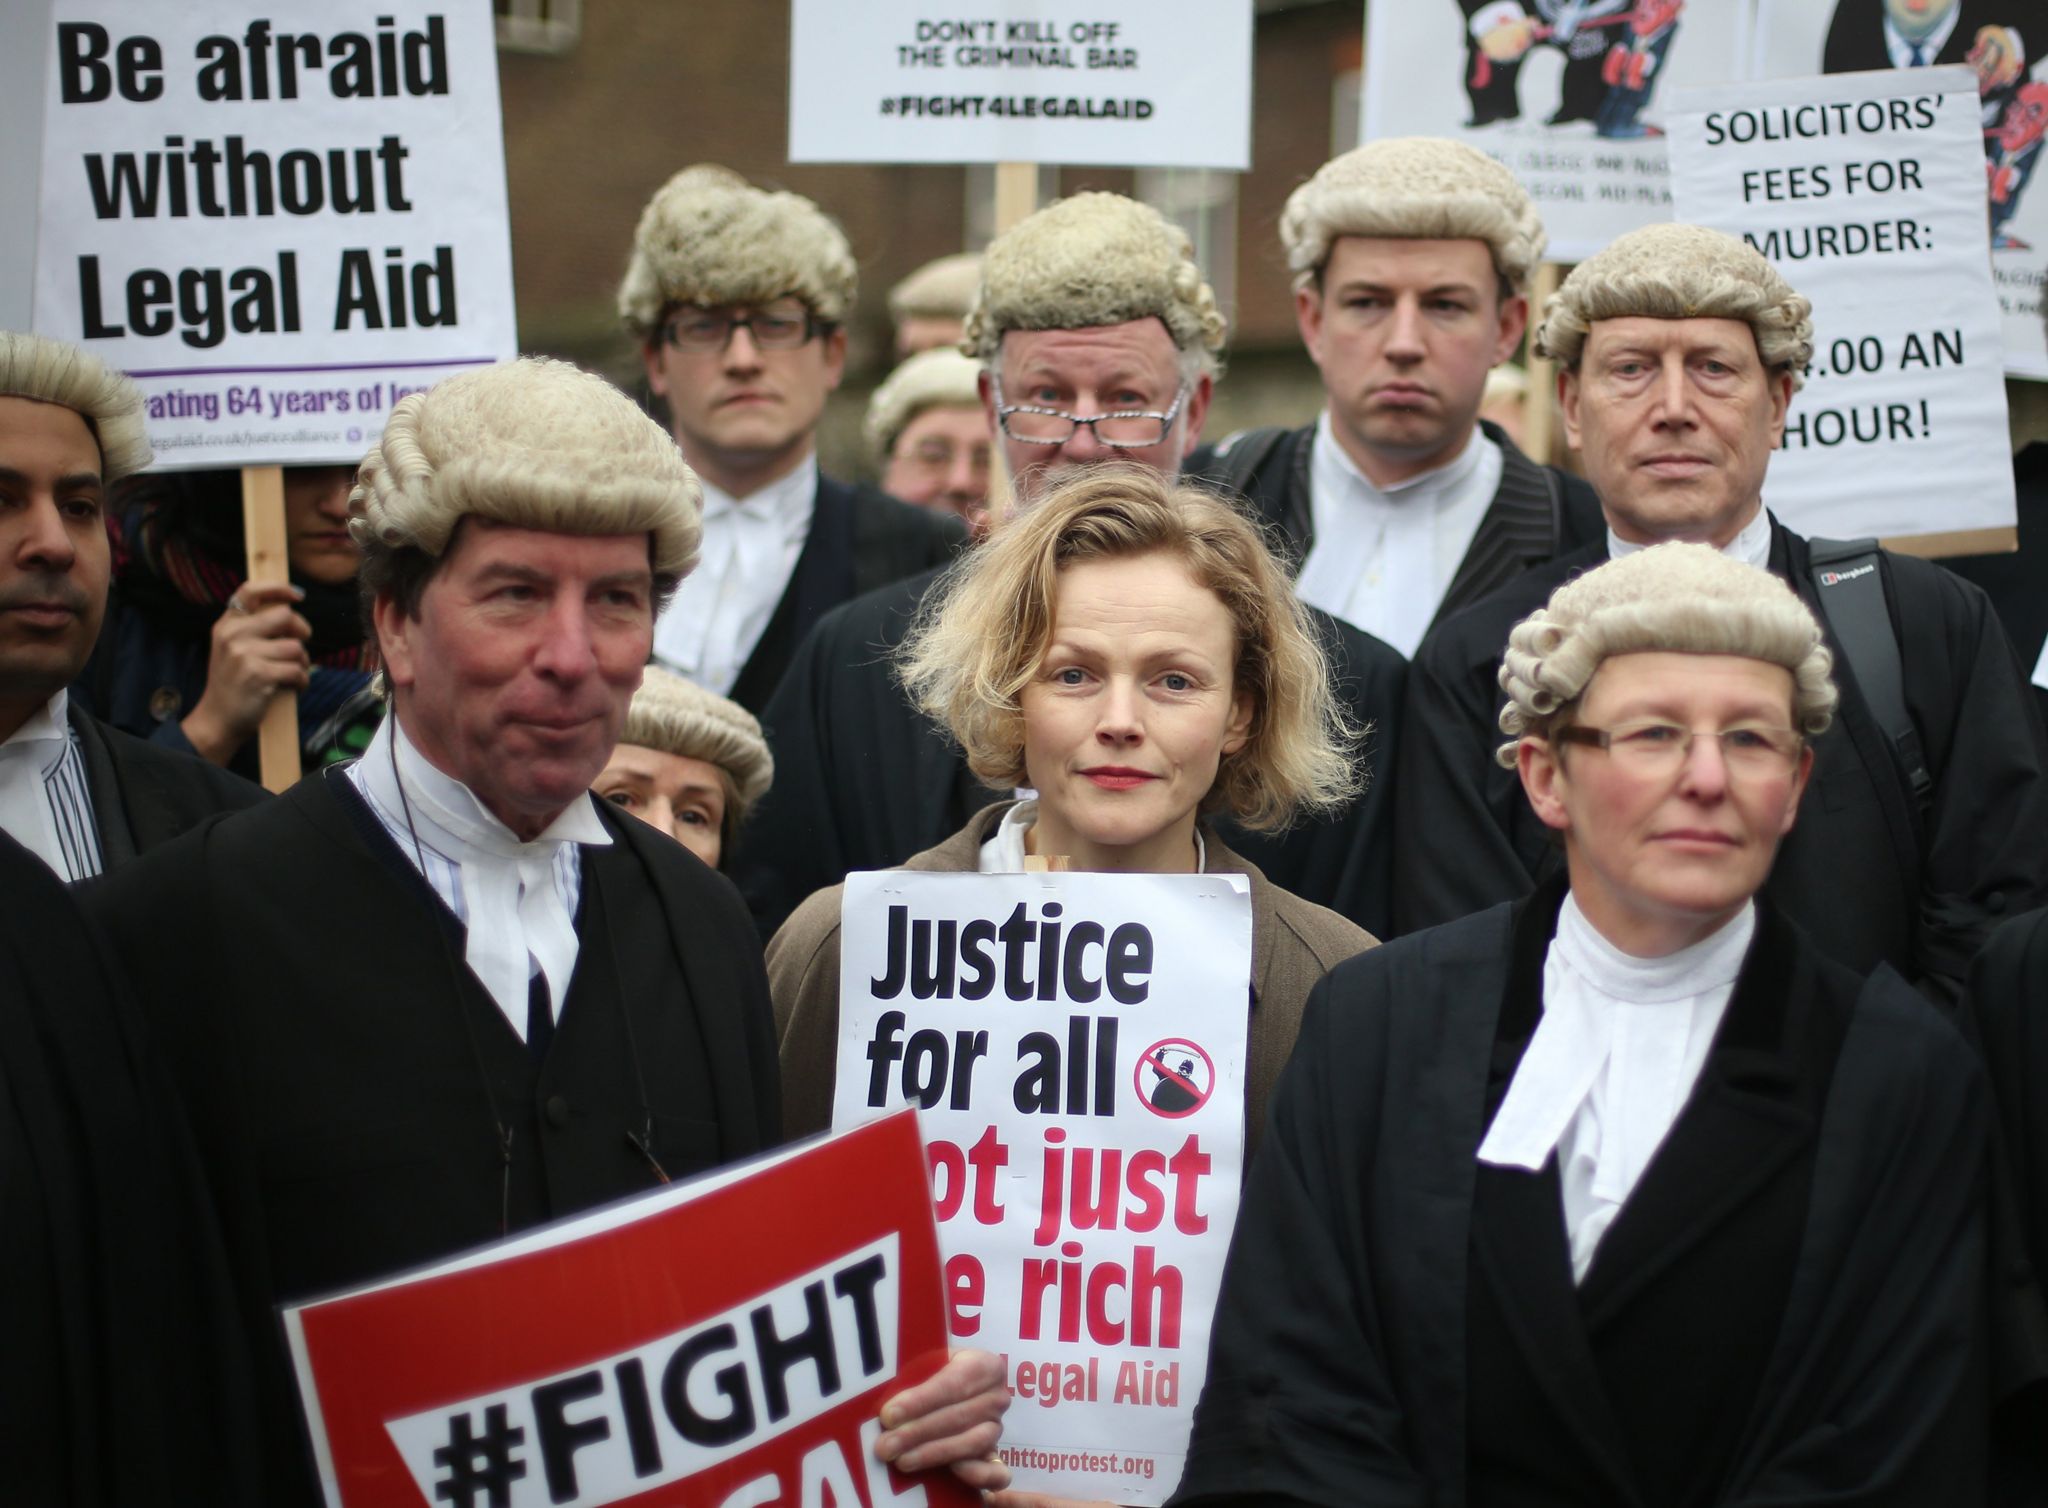 legal aid protest actress maxine peake with barristers in wigs and gowns. sign reads justice for all, not just the rich